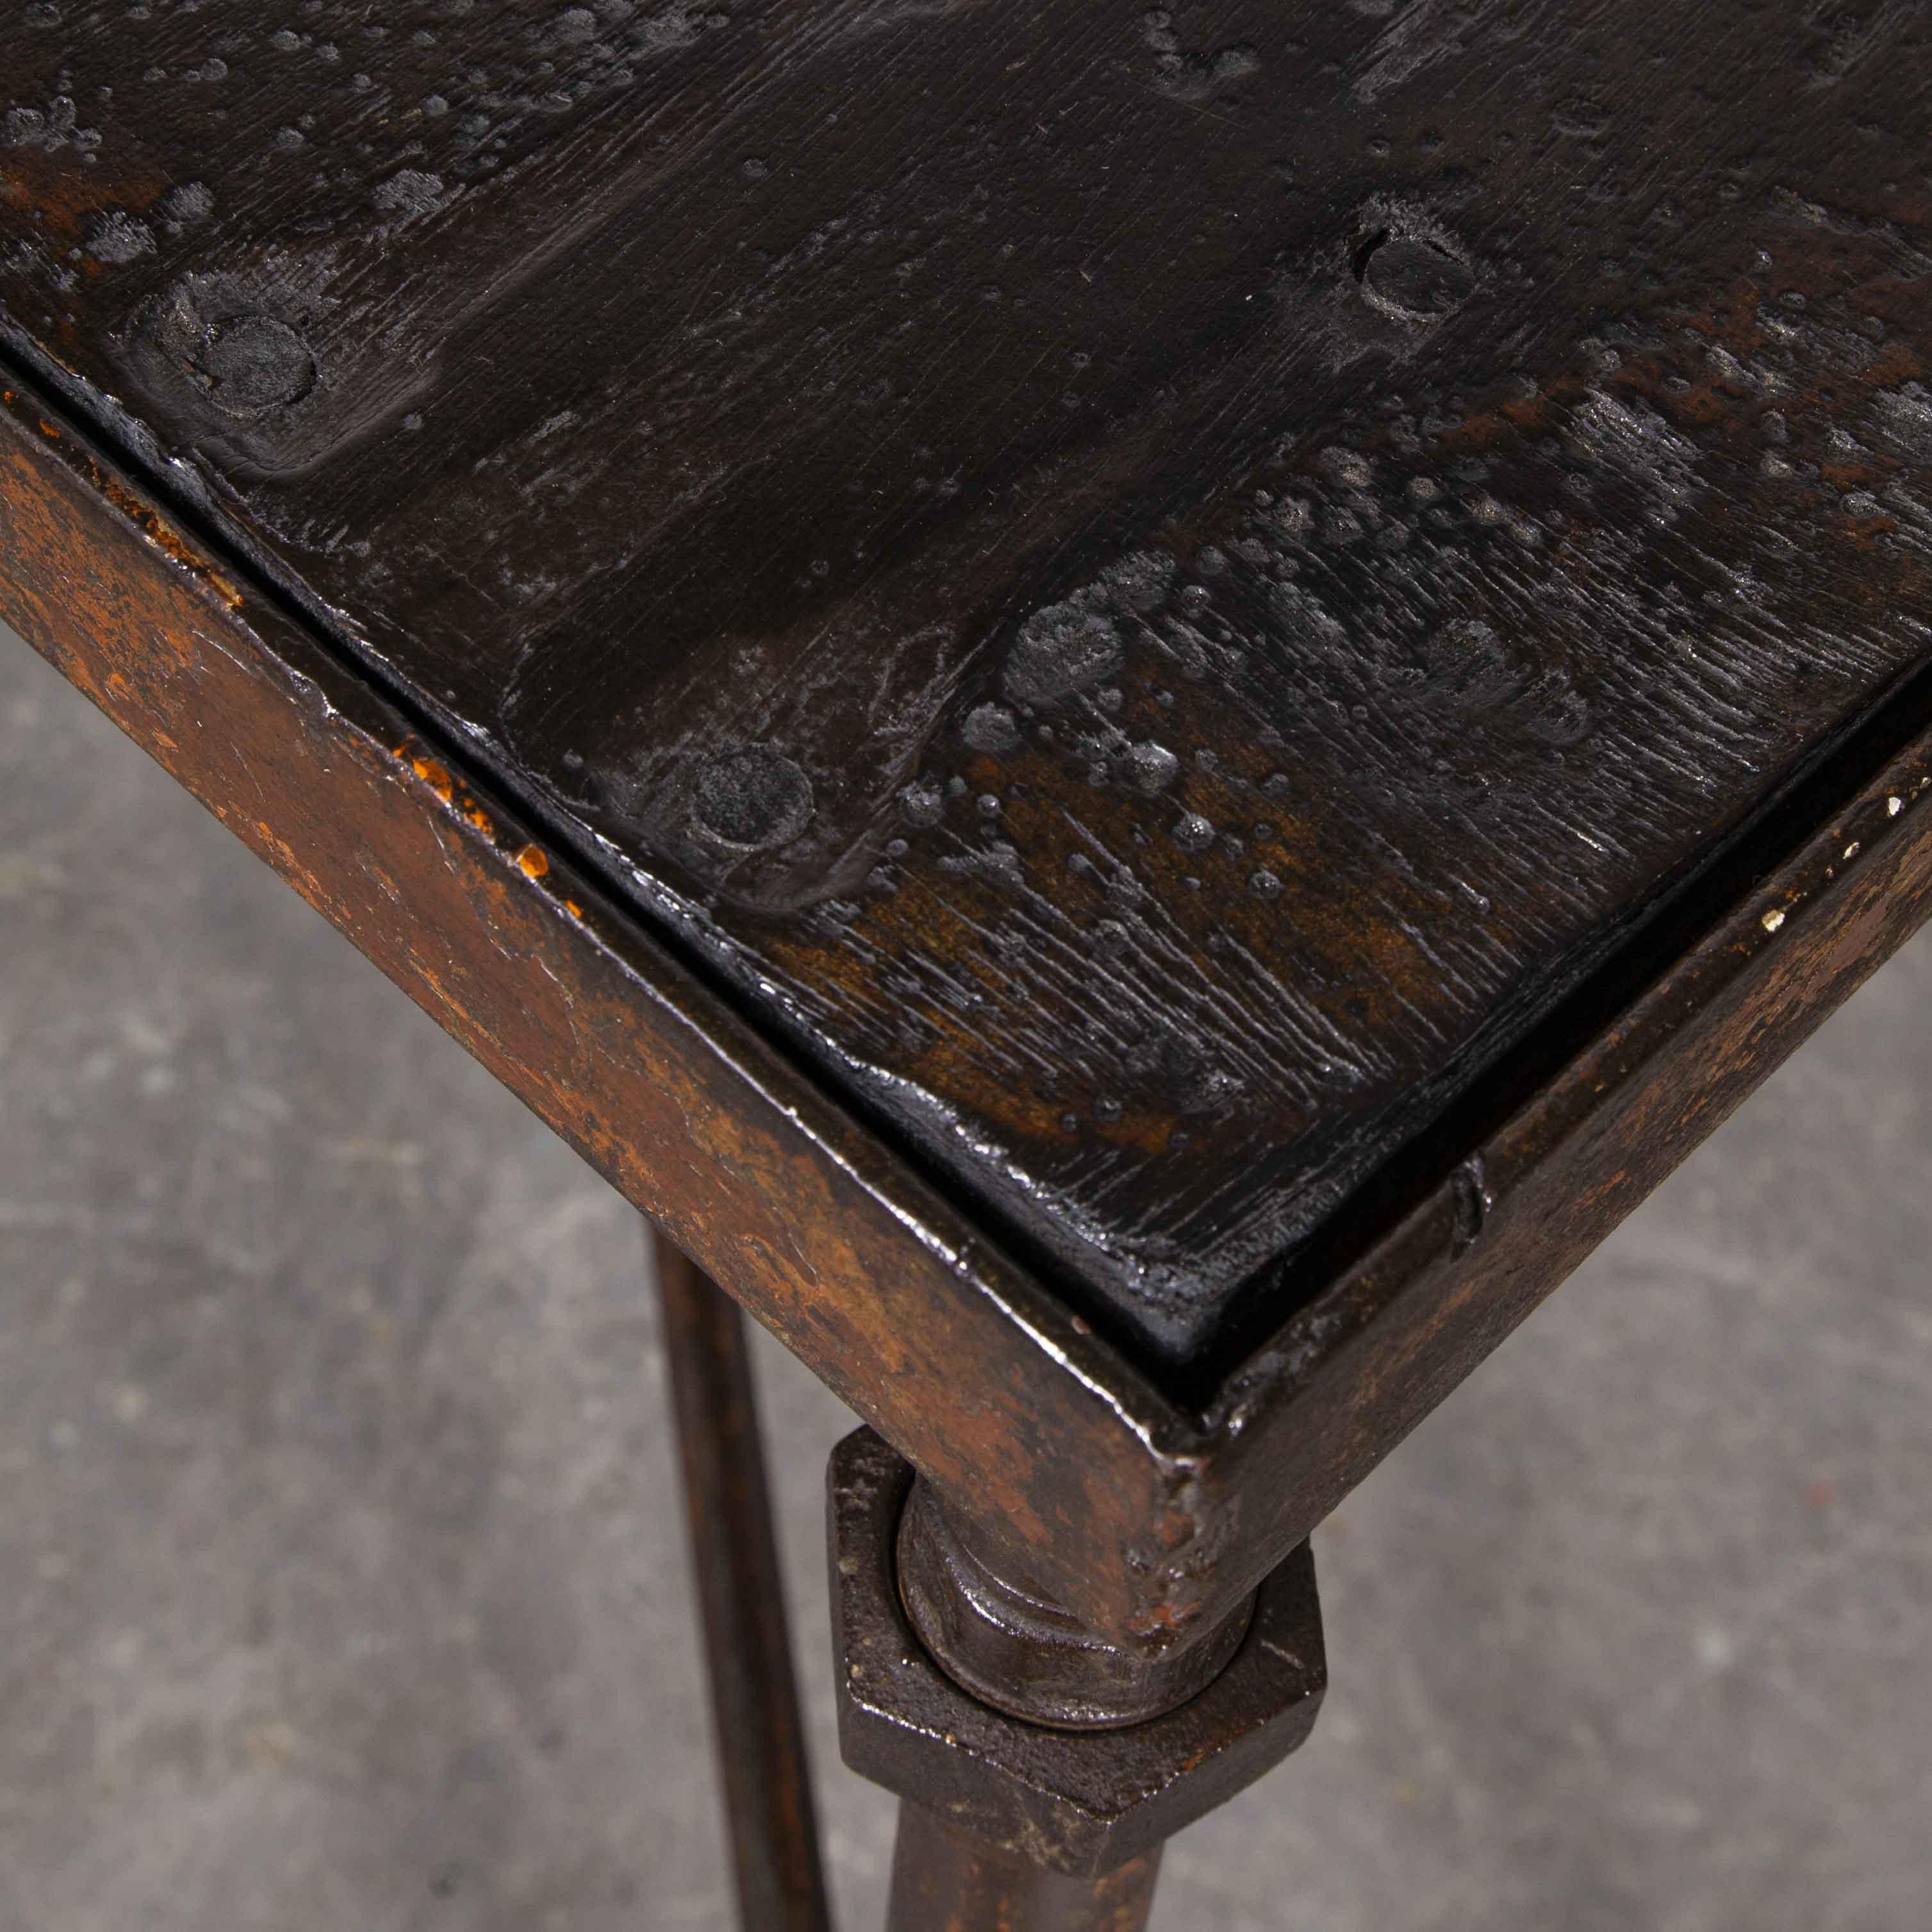 1940’s Large square Industrial console table

1940’s Large square Industrial console table. Sourced from a tannery in Belgium this large table stood pride of place in the sales atelier. The frame is welded solid with interesting detail and a rich